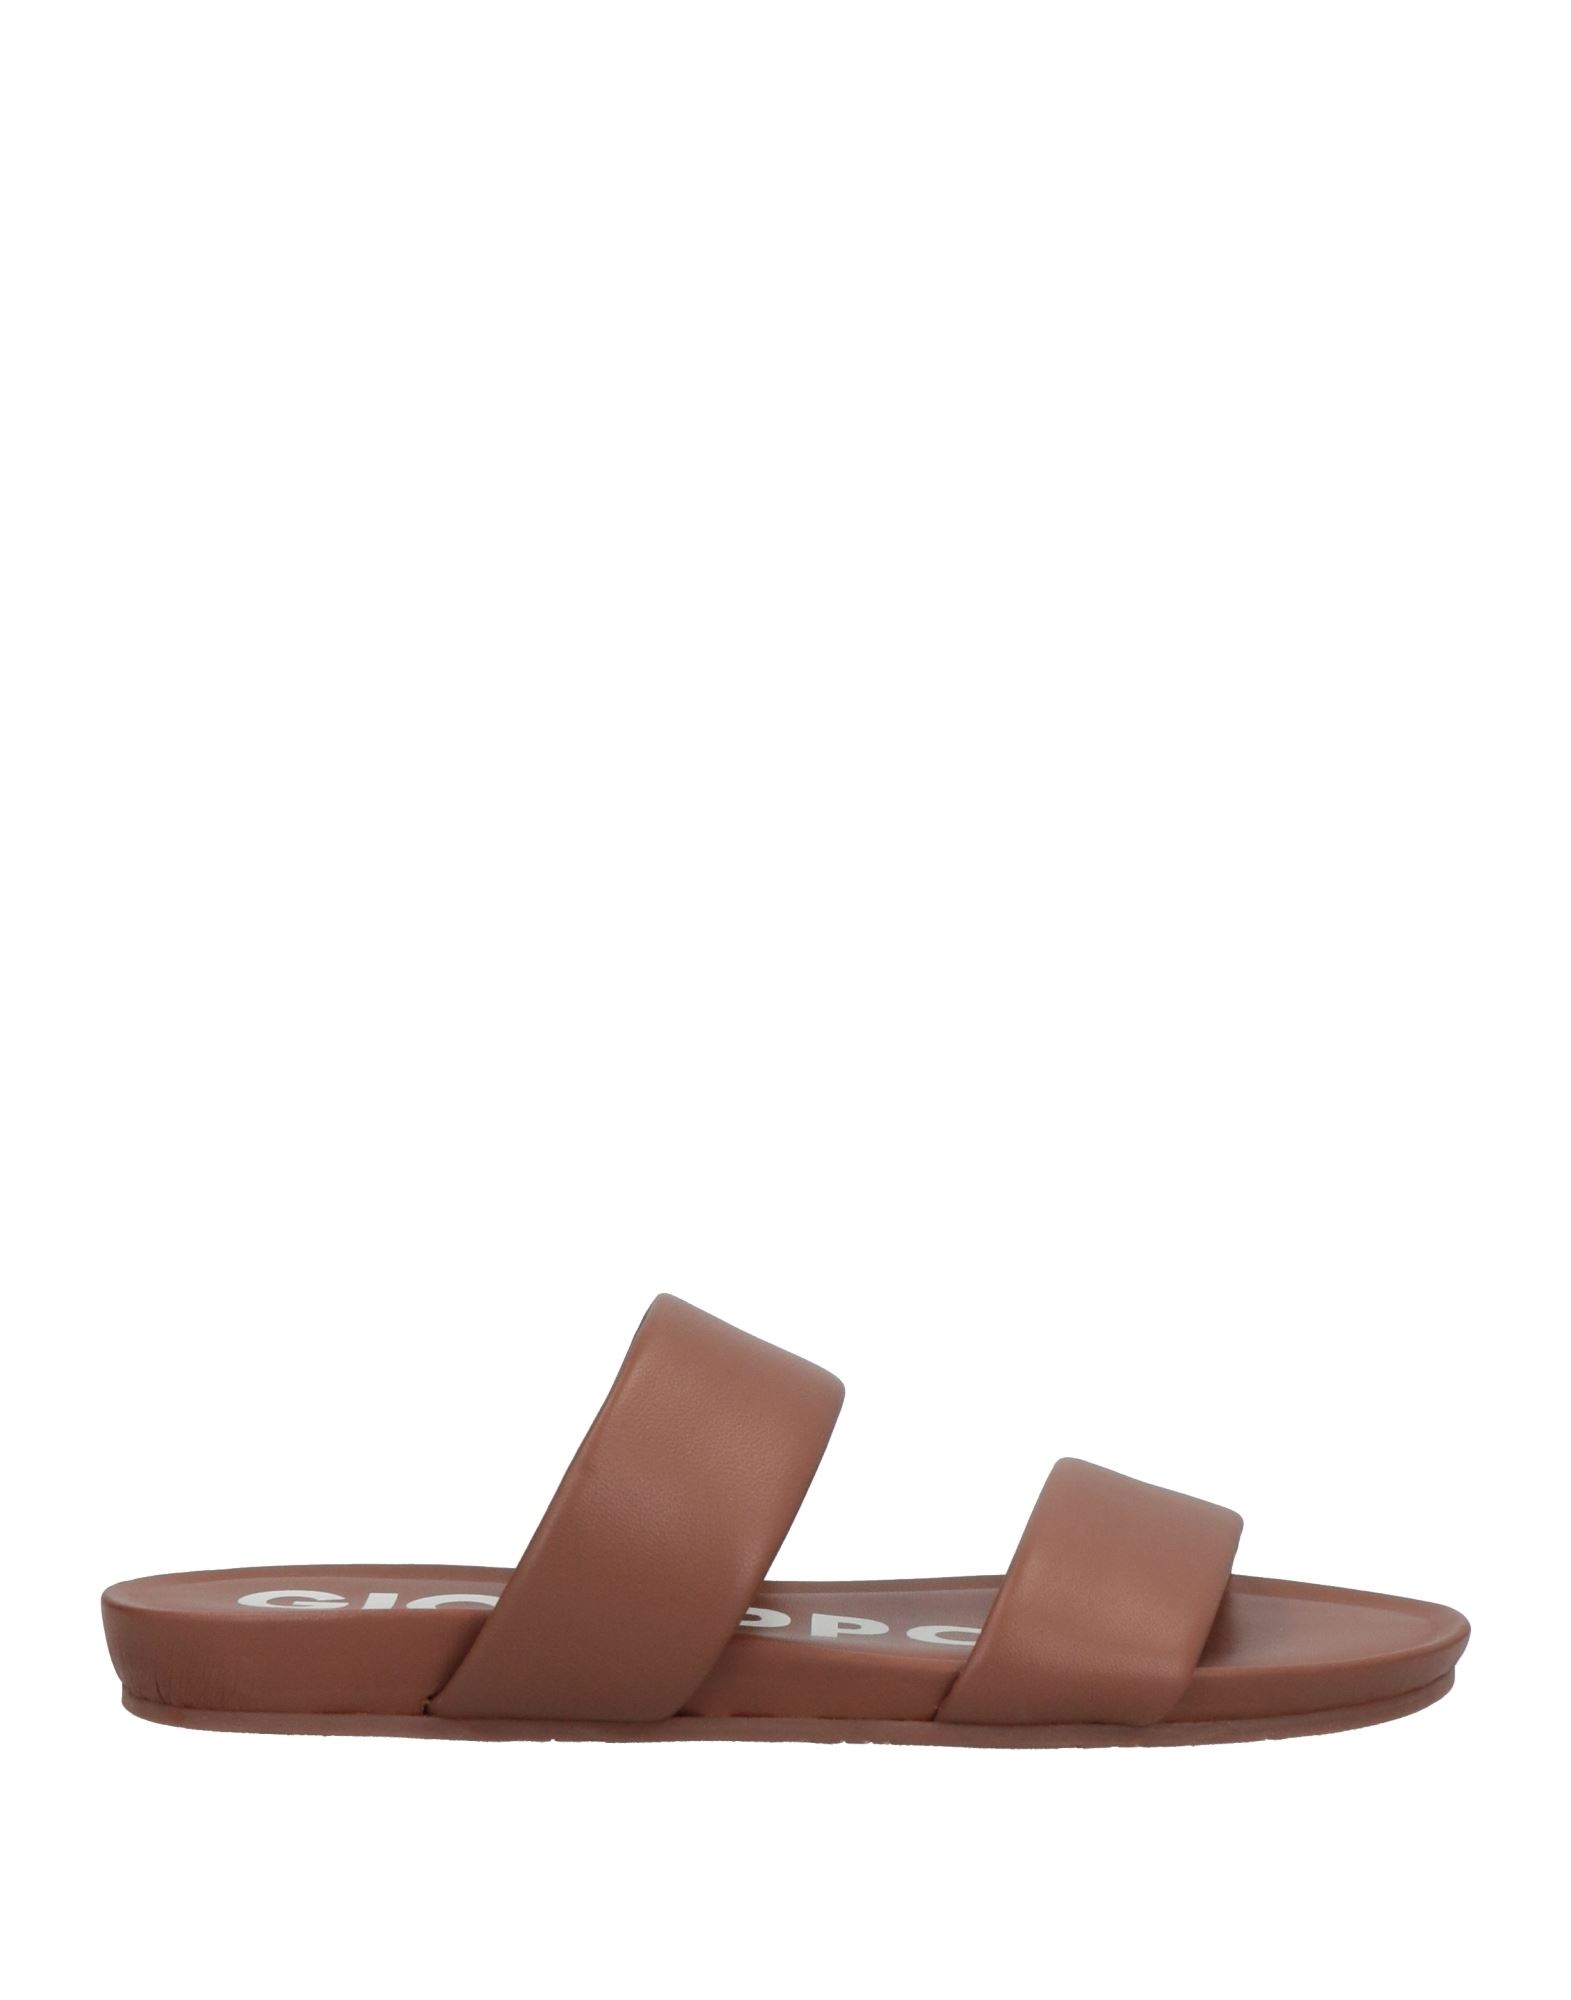 Gioseppo Sandals In Brown